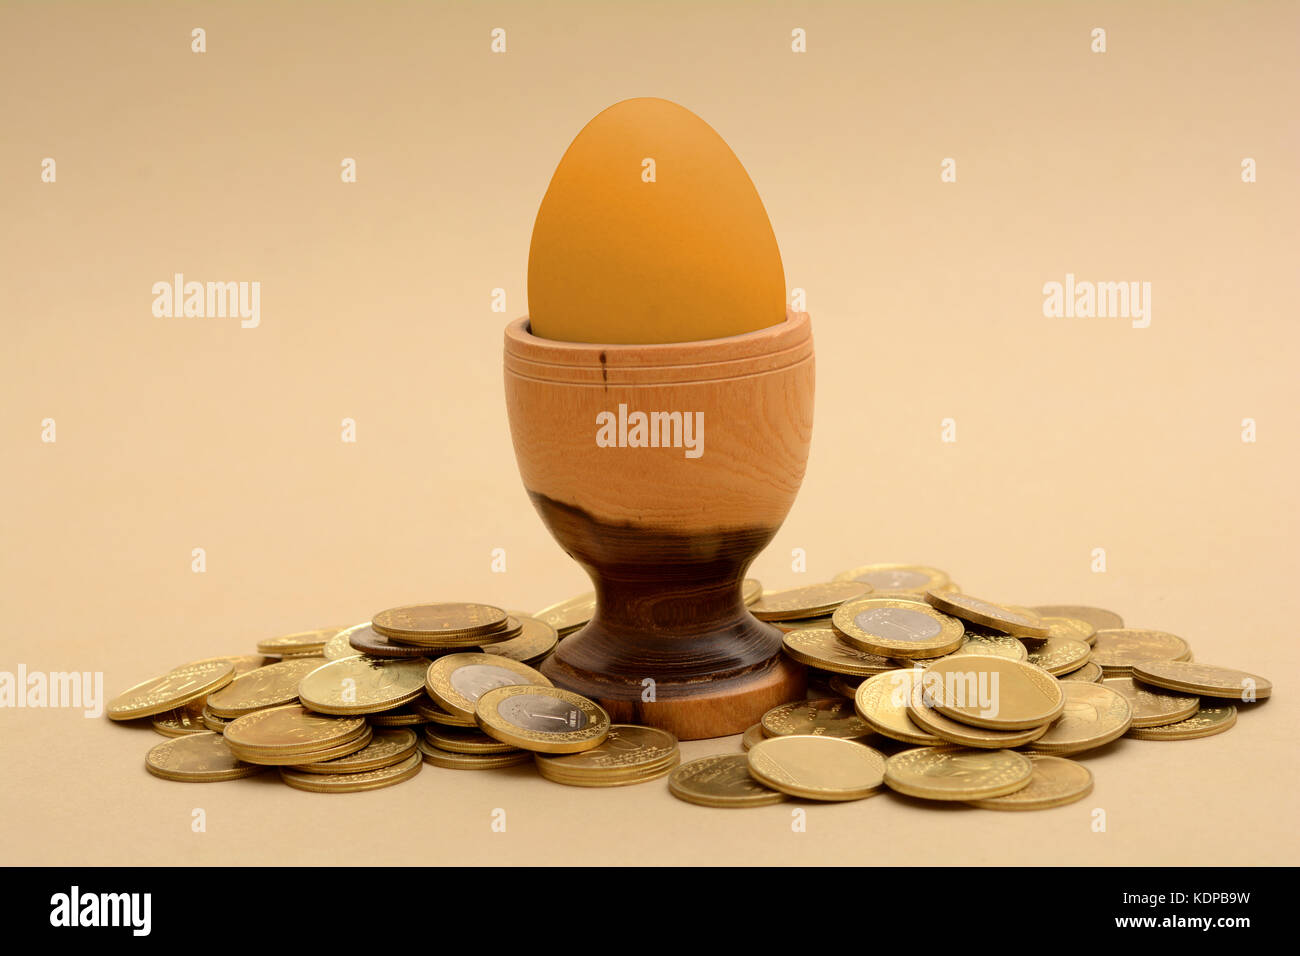 Golden Egg concept with gold coins pile. Stock Photo